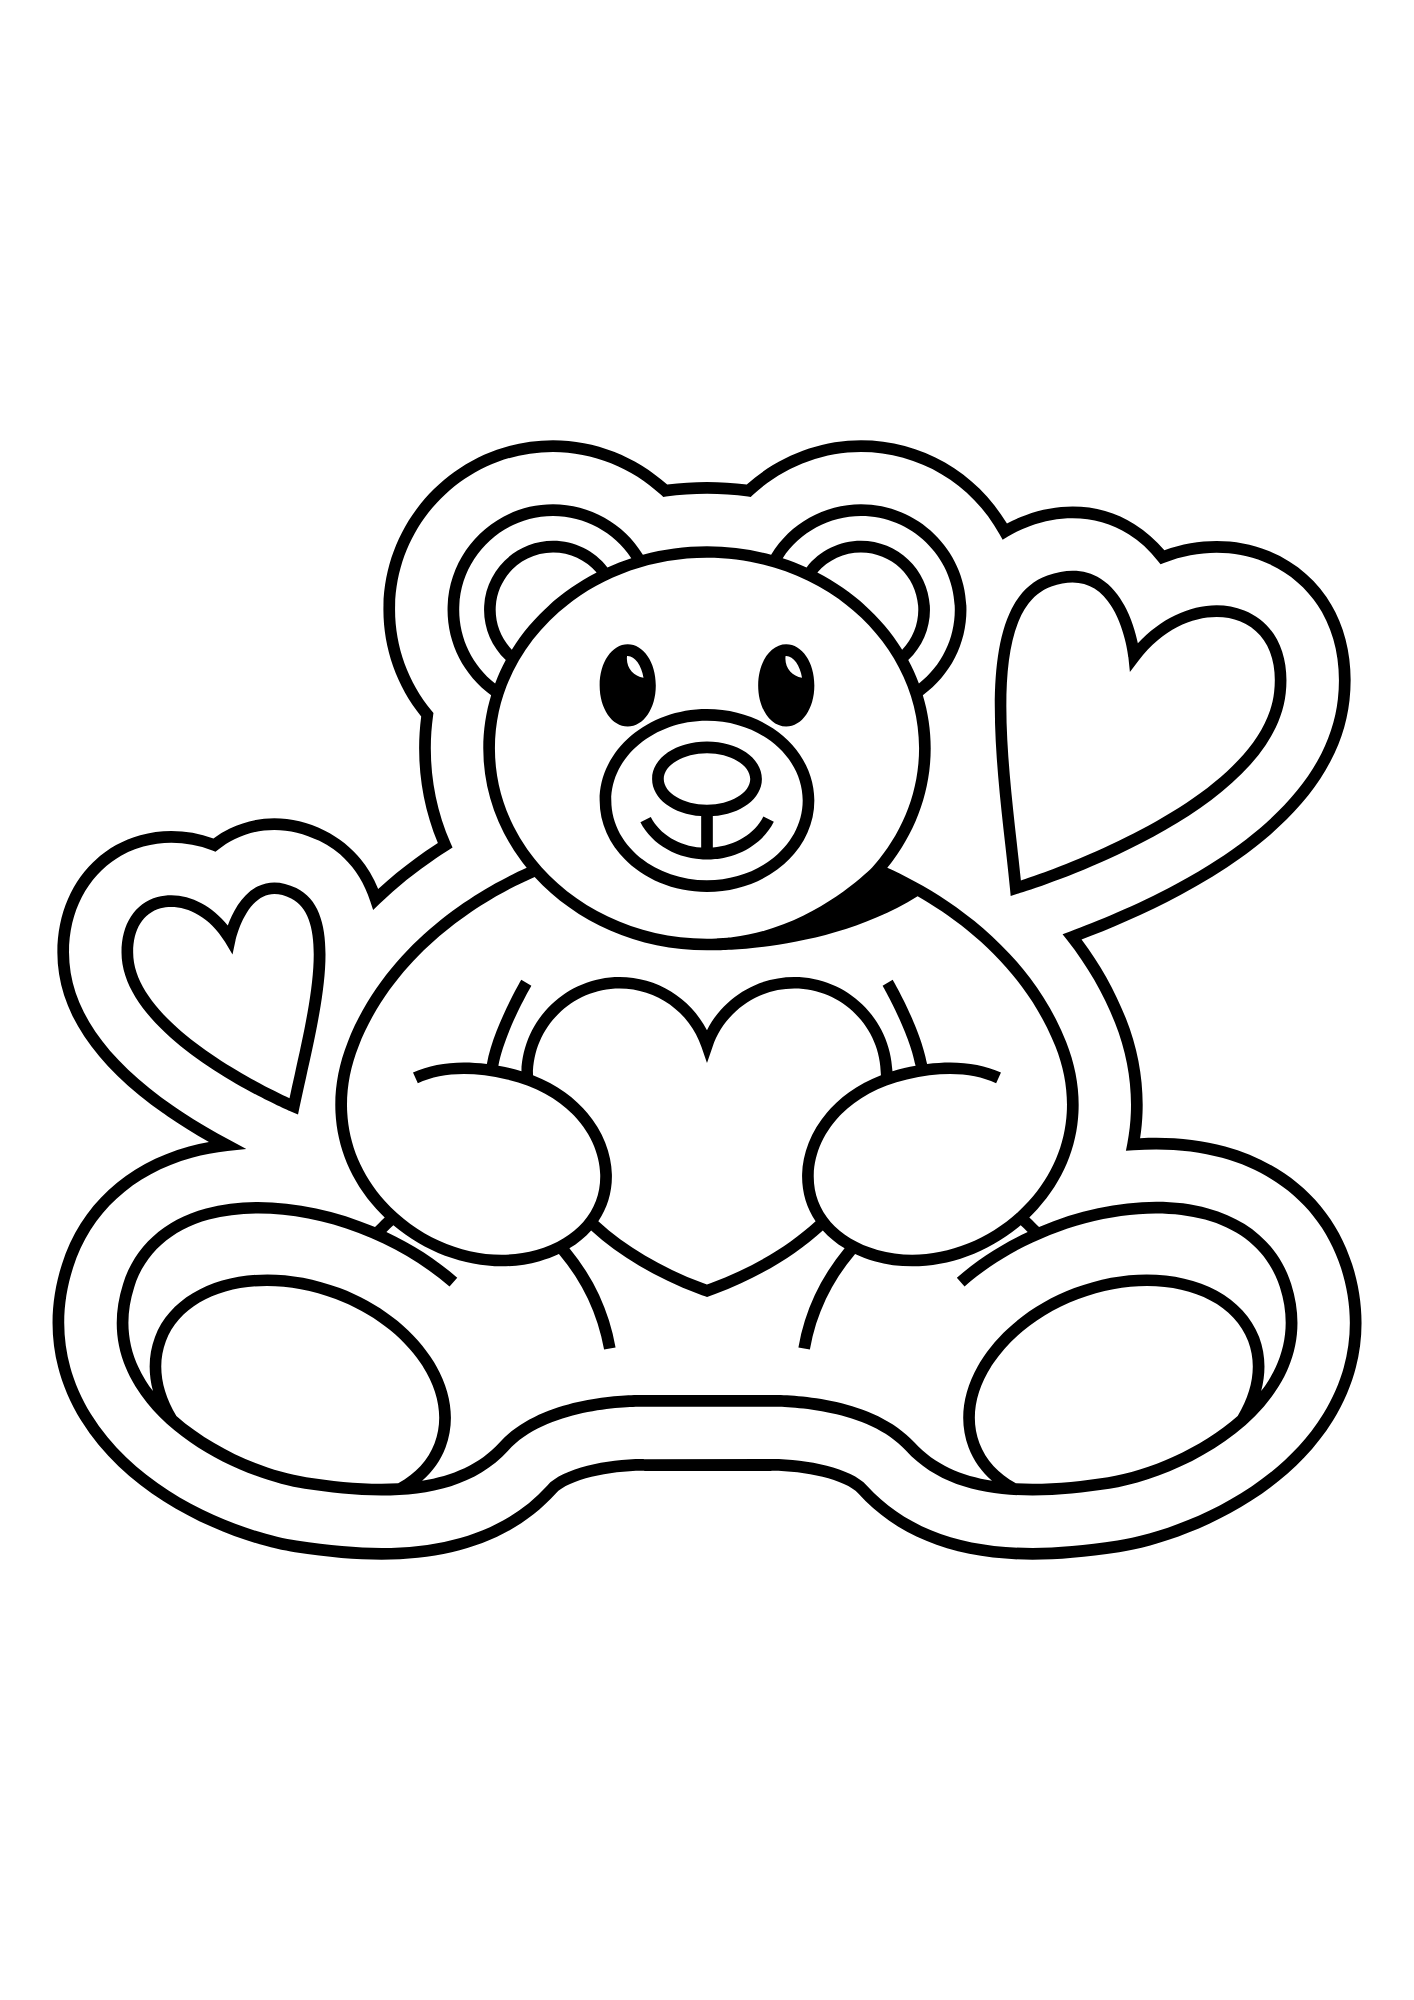 Valentine Heart Bunny Coloring Page